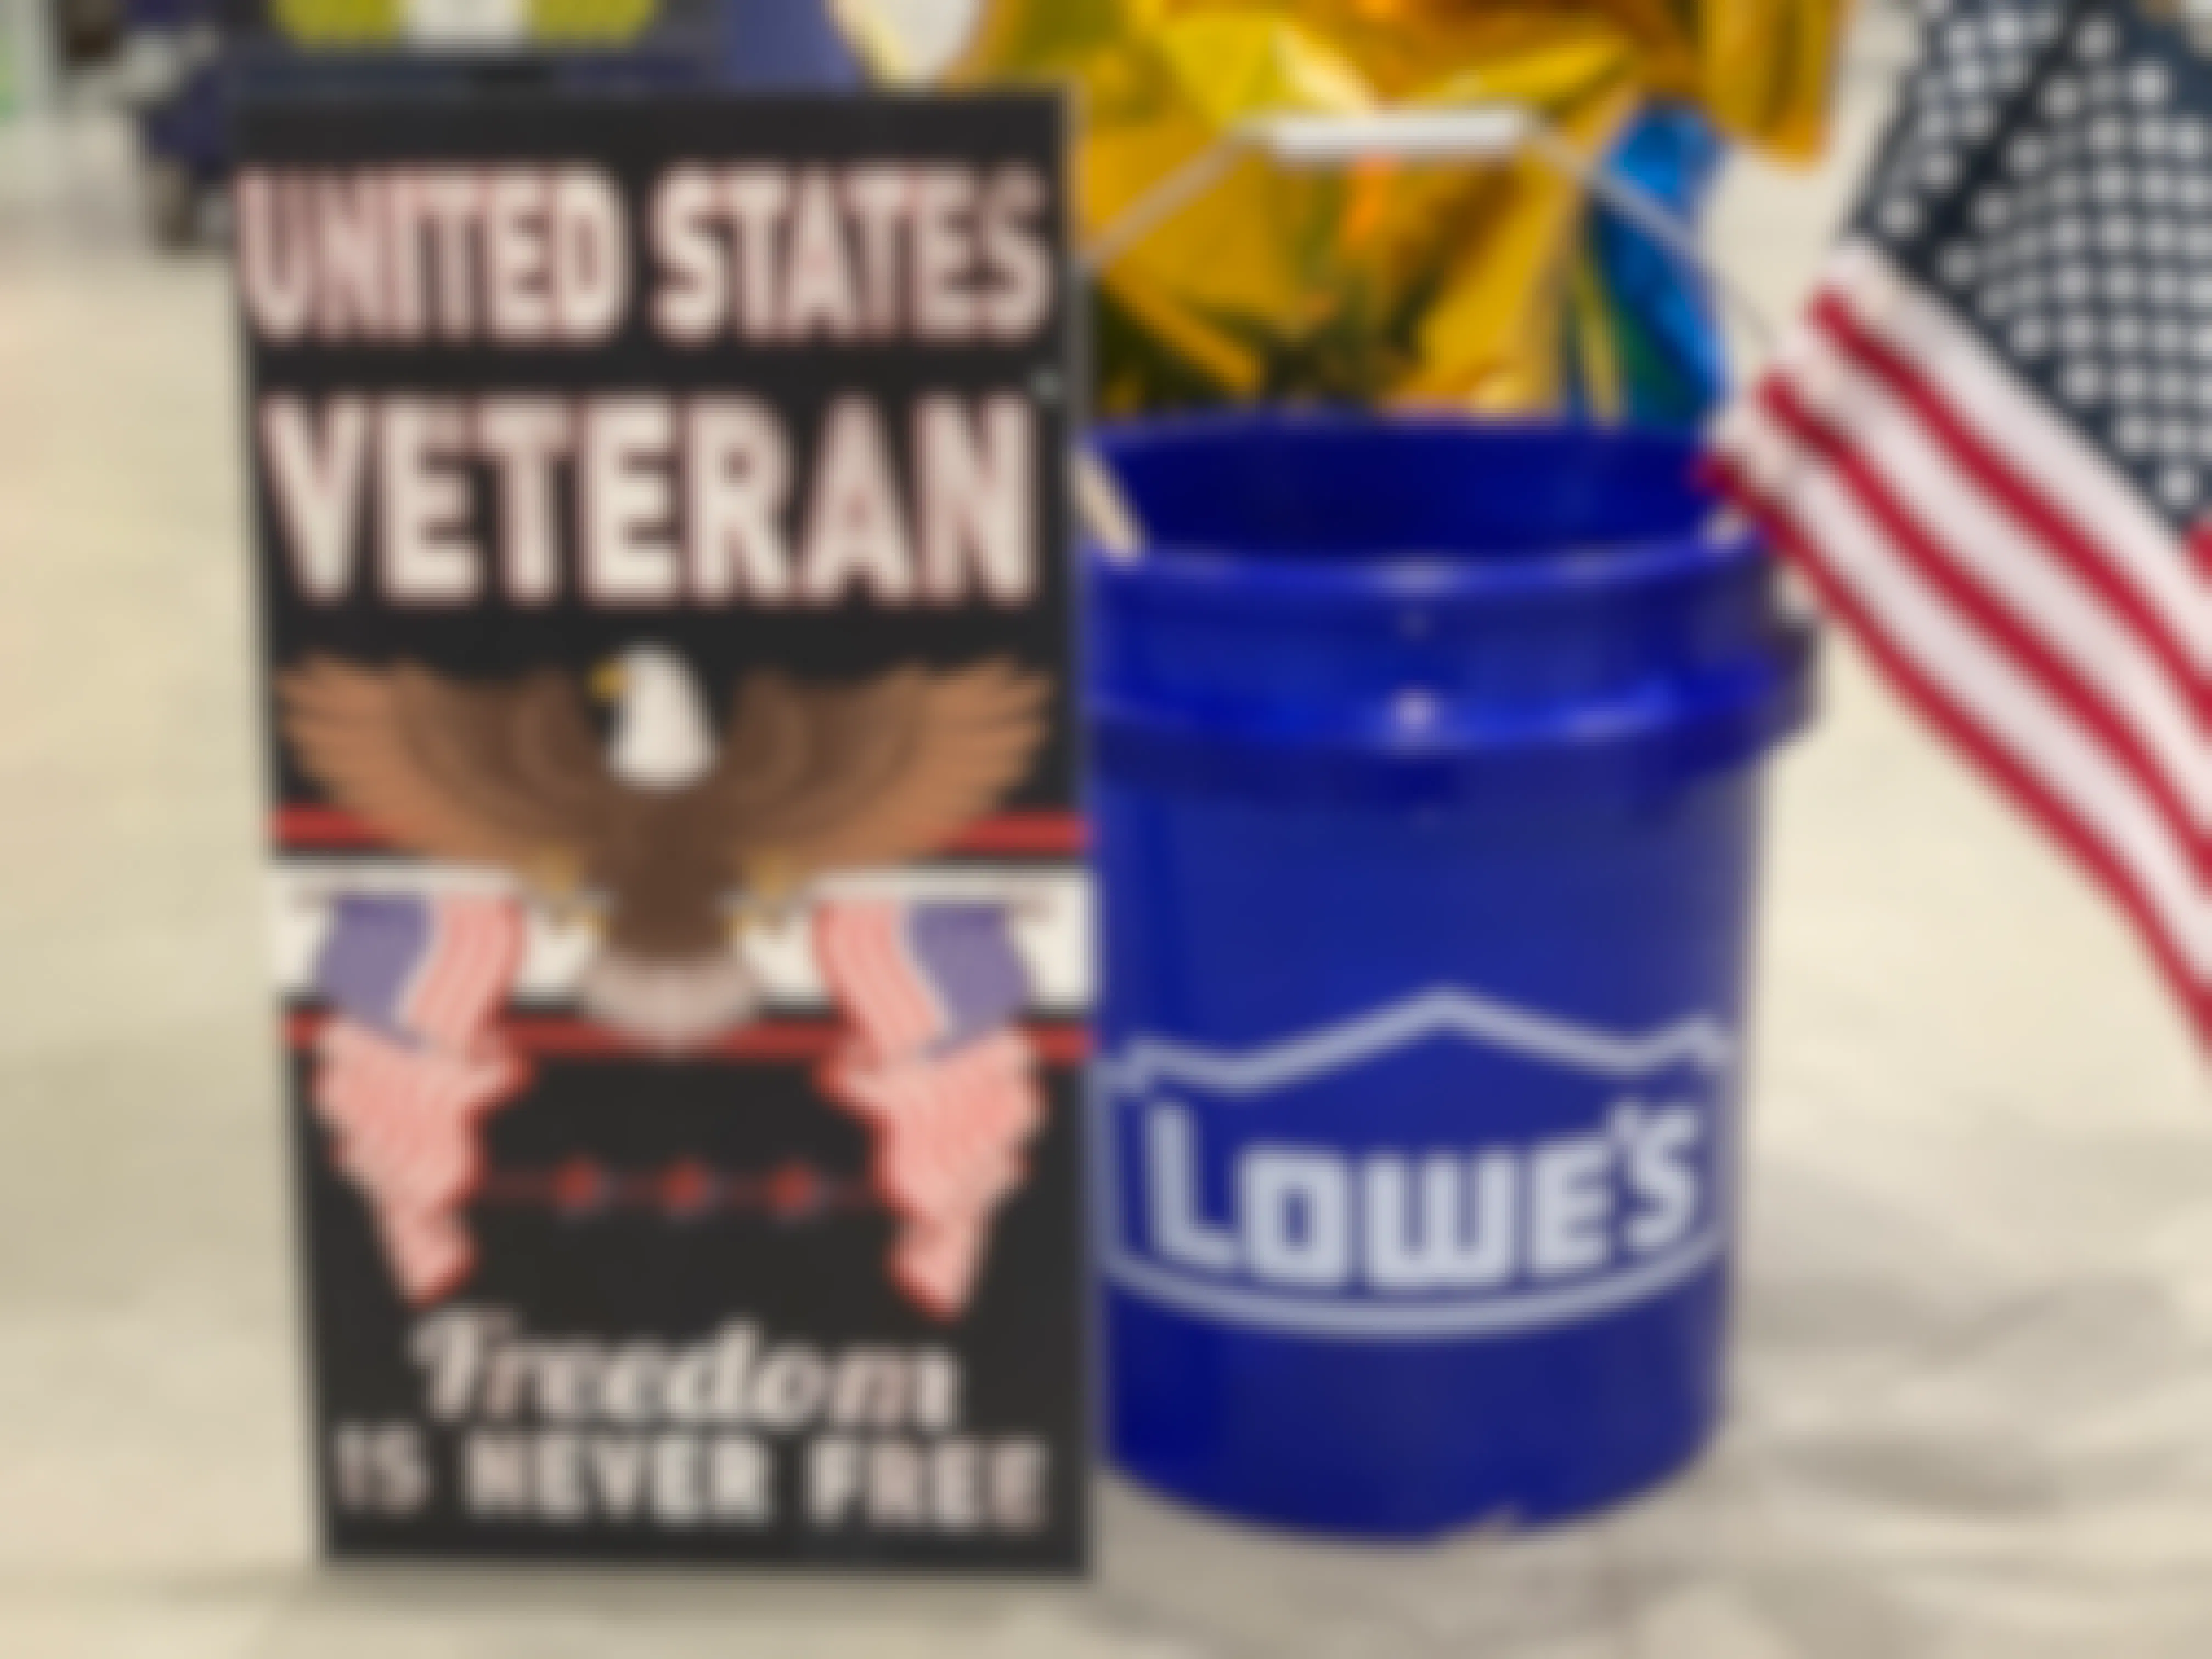 veteran sign with lowes bucket full of american flags